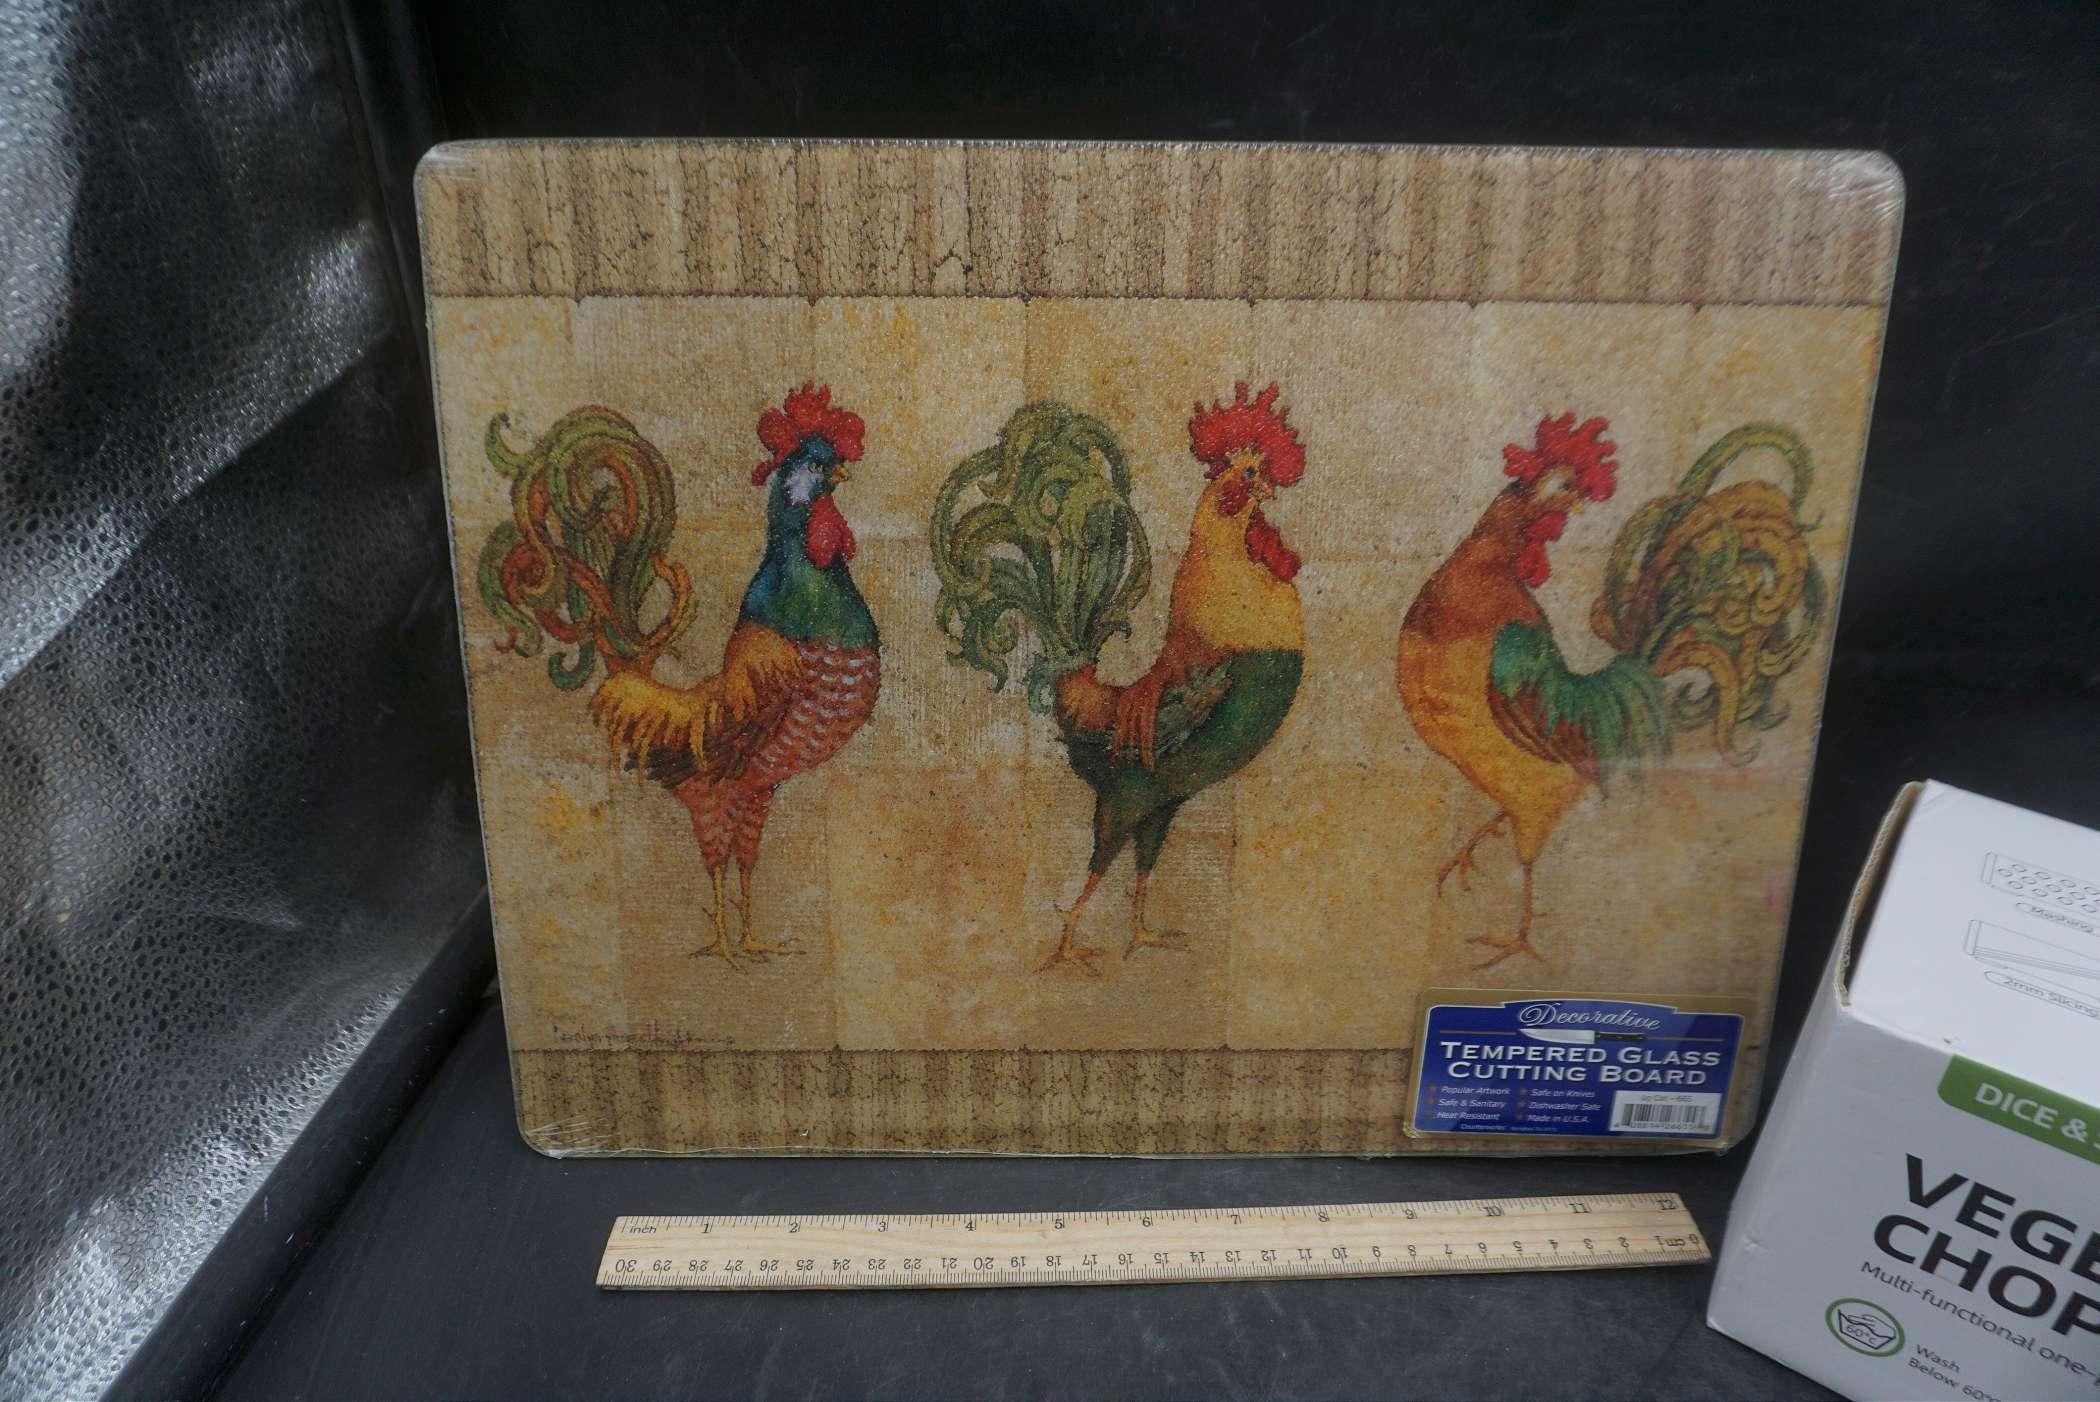 Vegetable Chopper & Rooster Tempered Glass Cutting Board